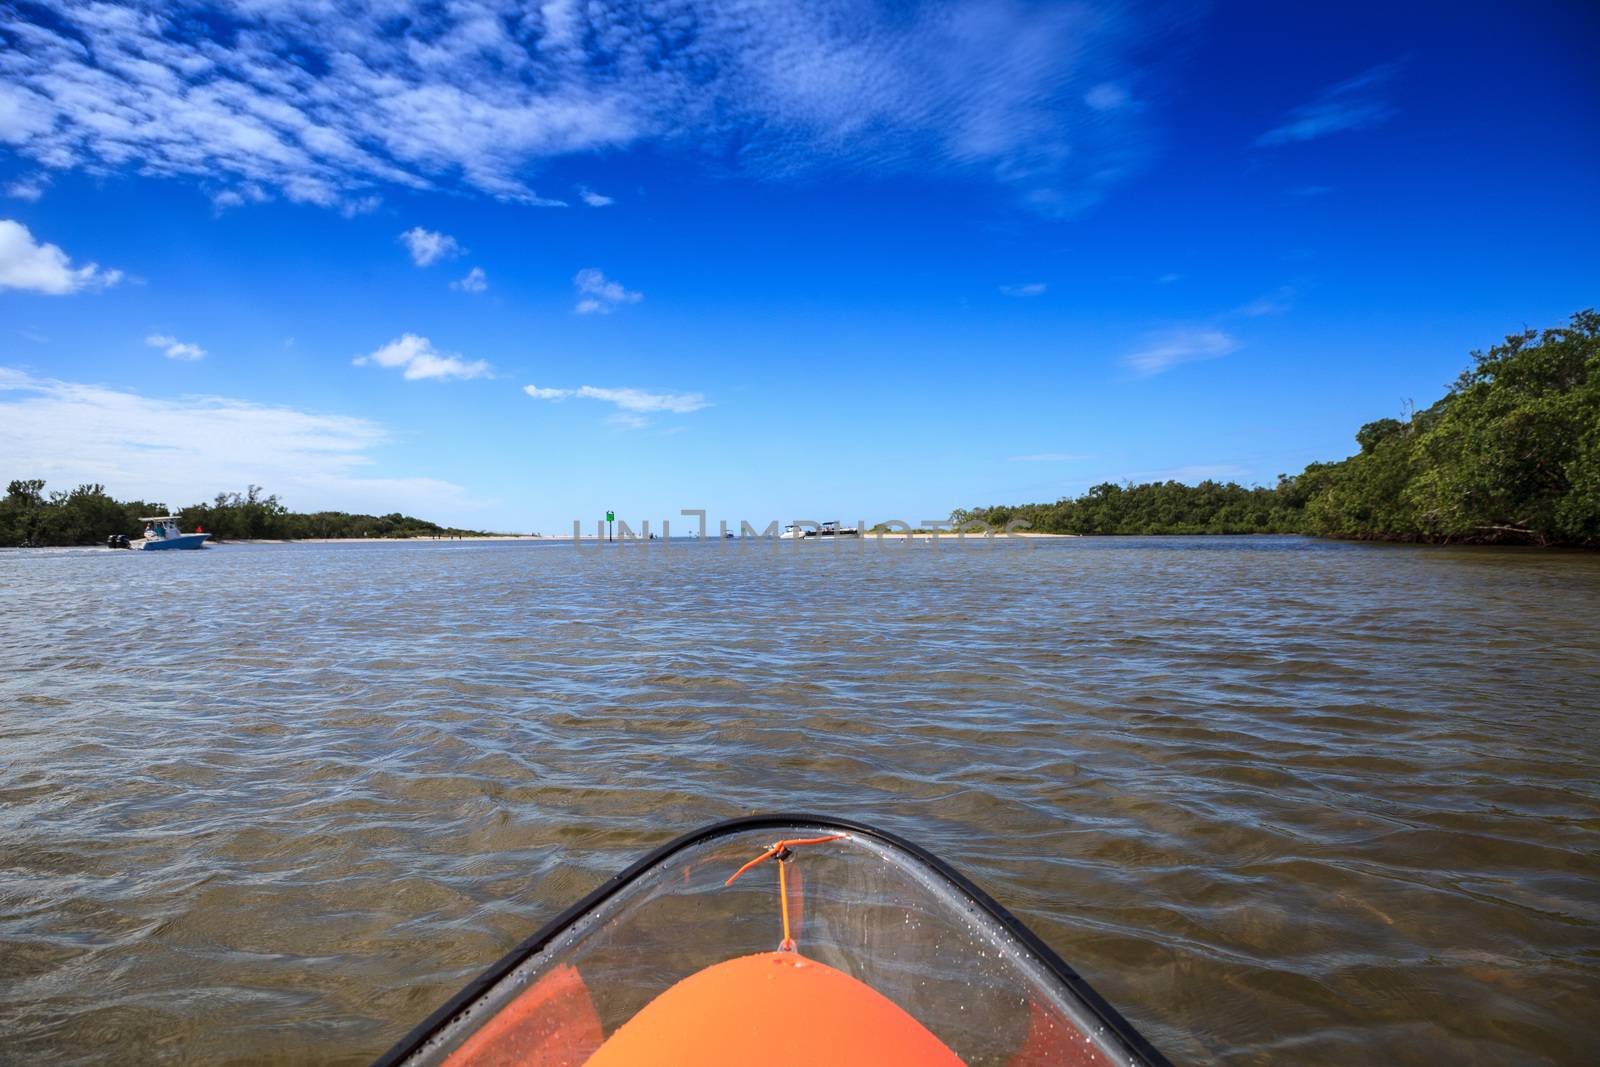 Clear see-through kayak forges its way through the waters of Delnor-Wiggins pass in Bonita Springs, Florida.